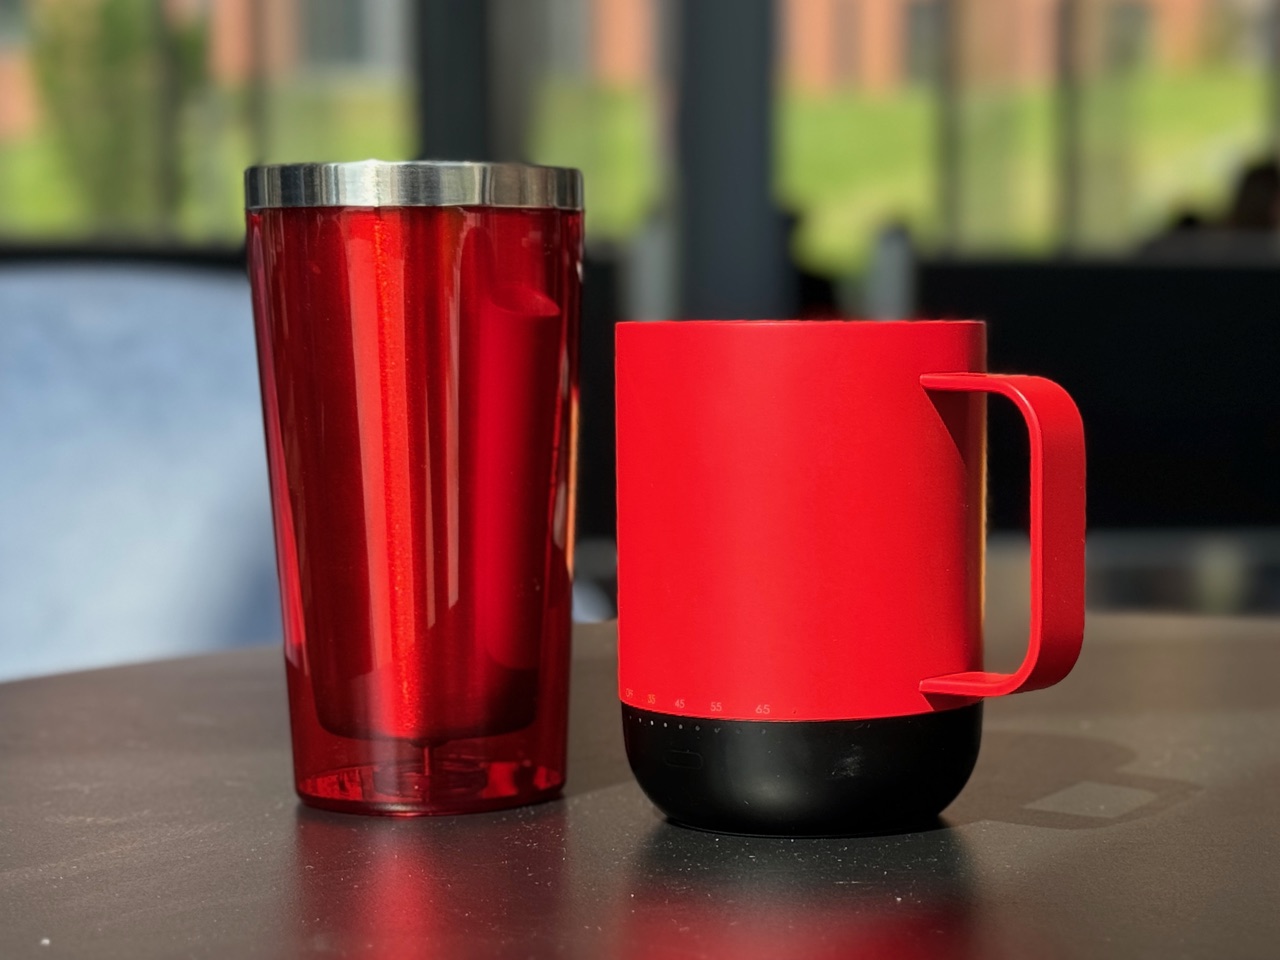 A red reusable tumbler and a red and black reusable mug sit on a cafe table.